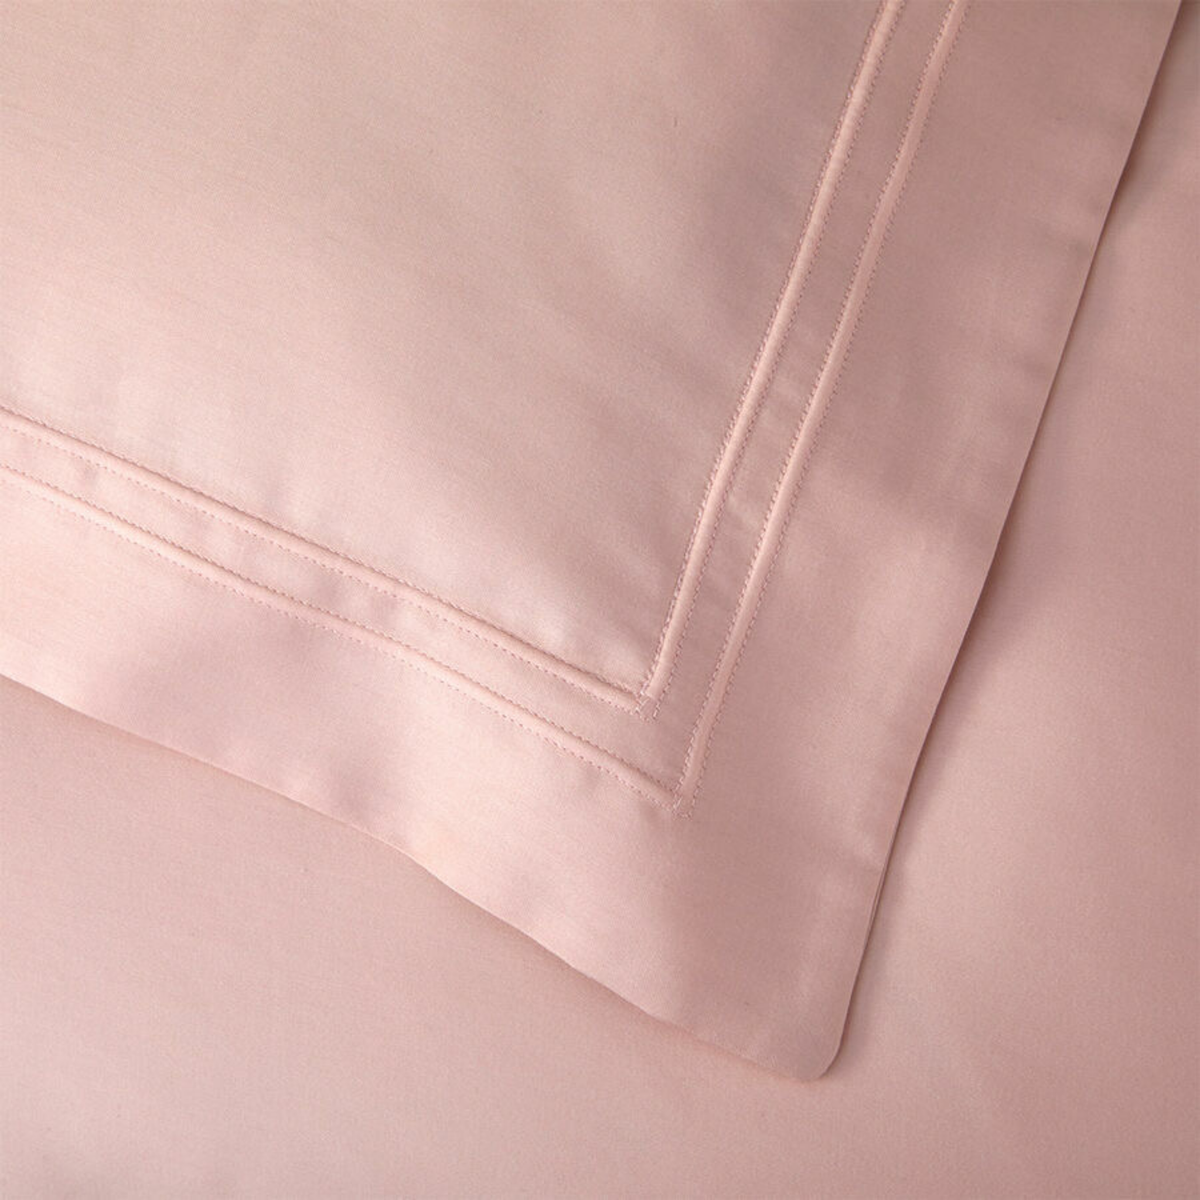 Fabric Closeup of Yves Delorme Triomphe Bedding in Poudre Color